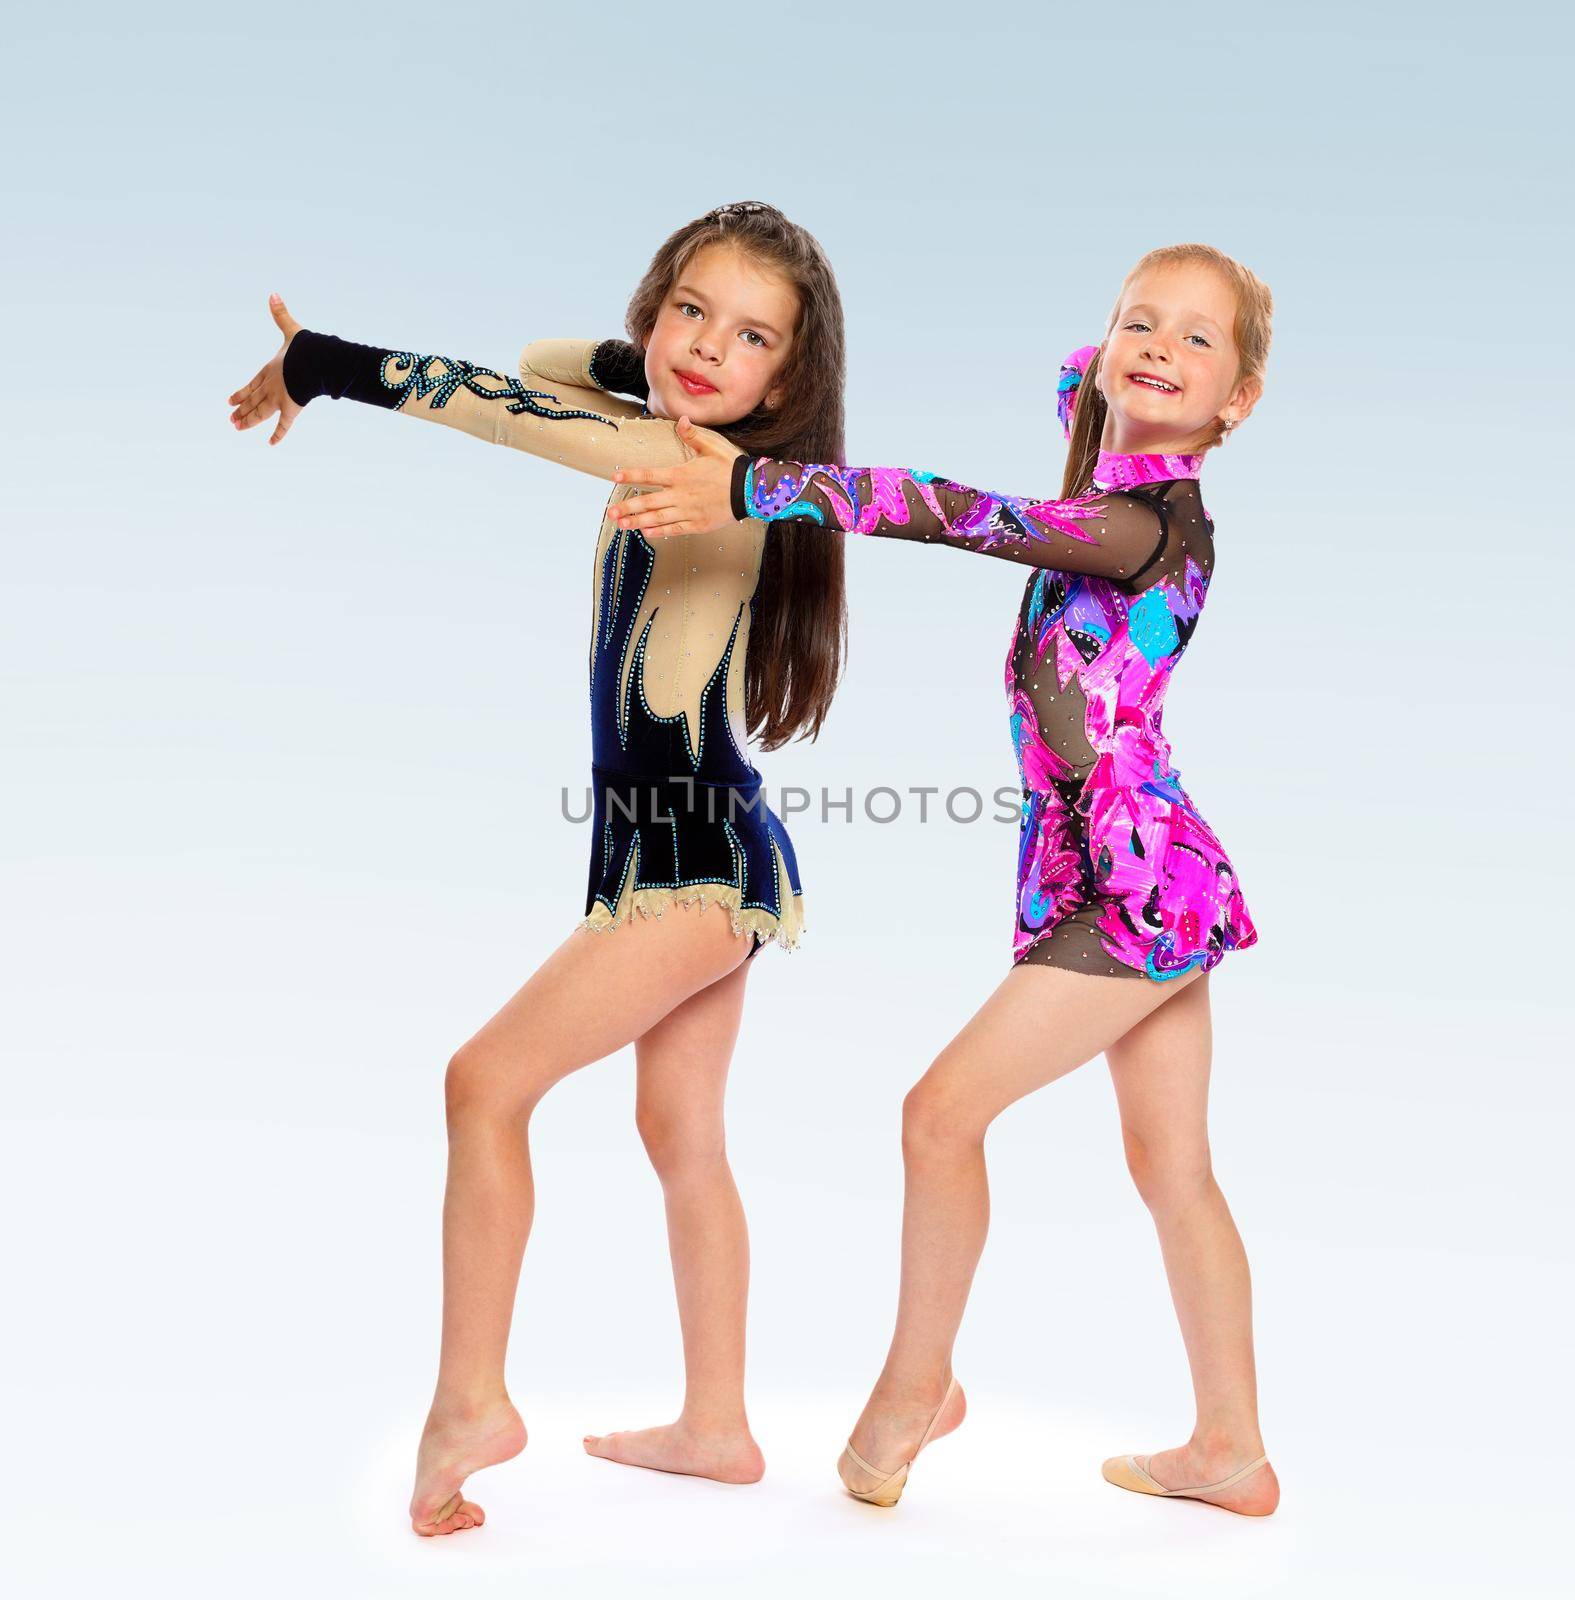 two girls gymnast gymnastic exercises shows costumes.